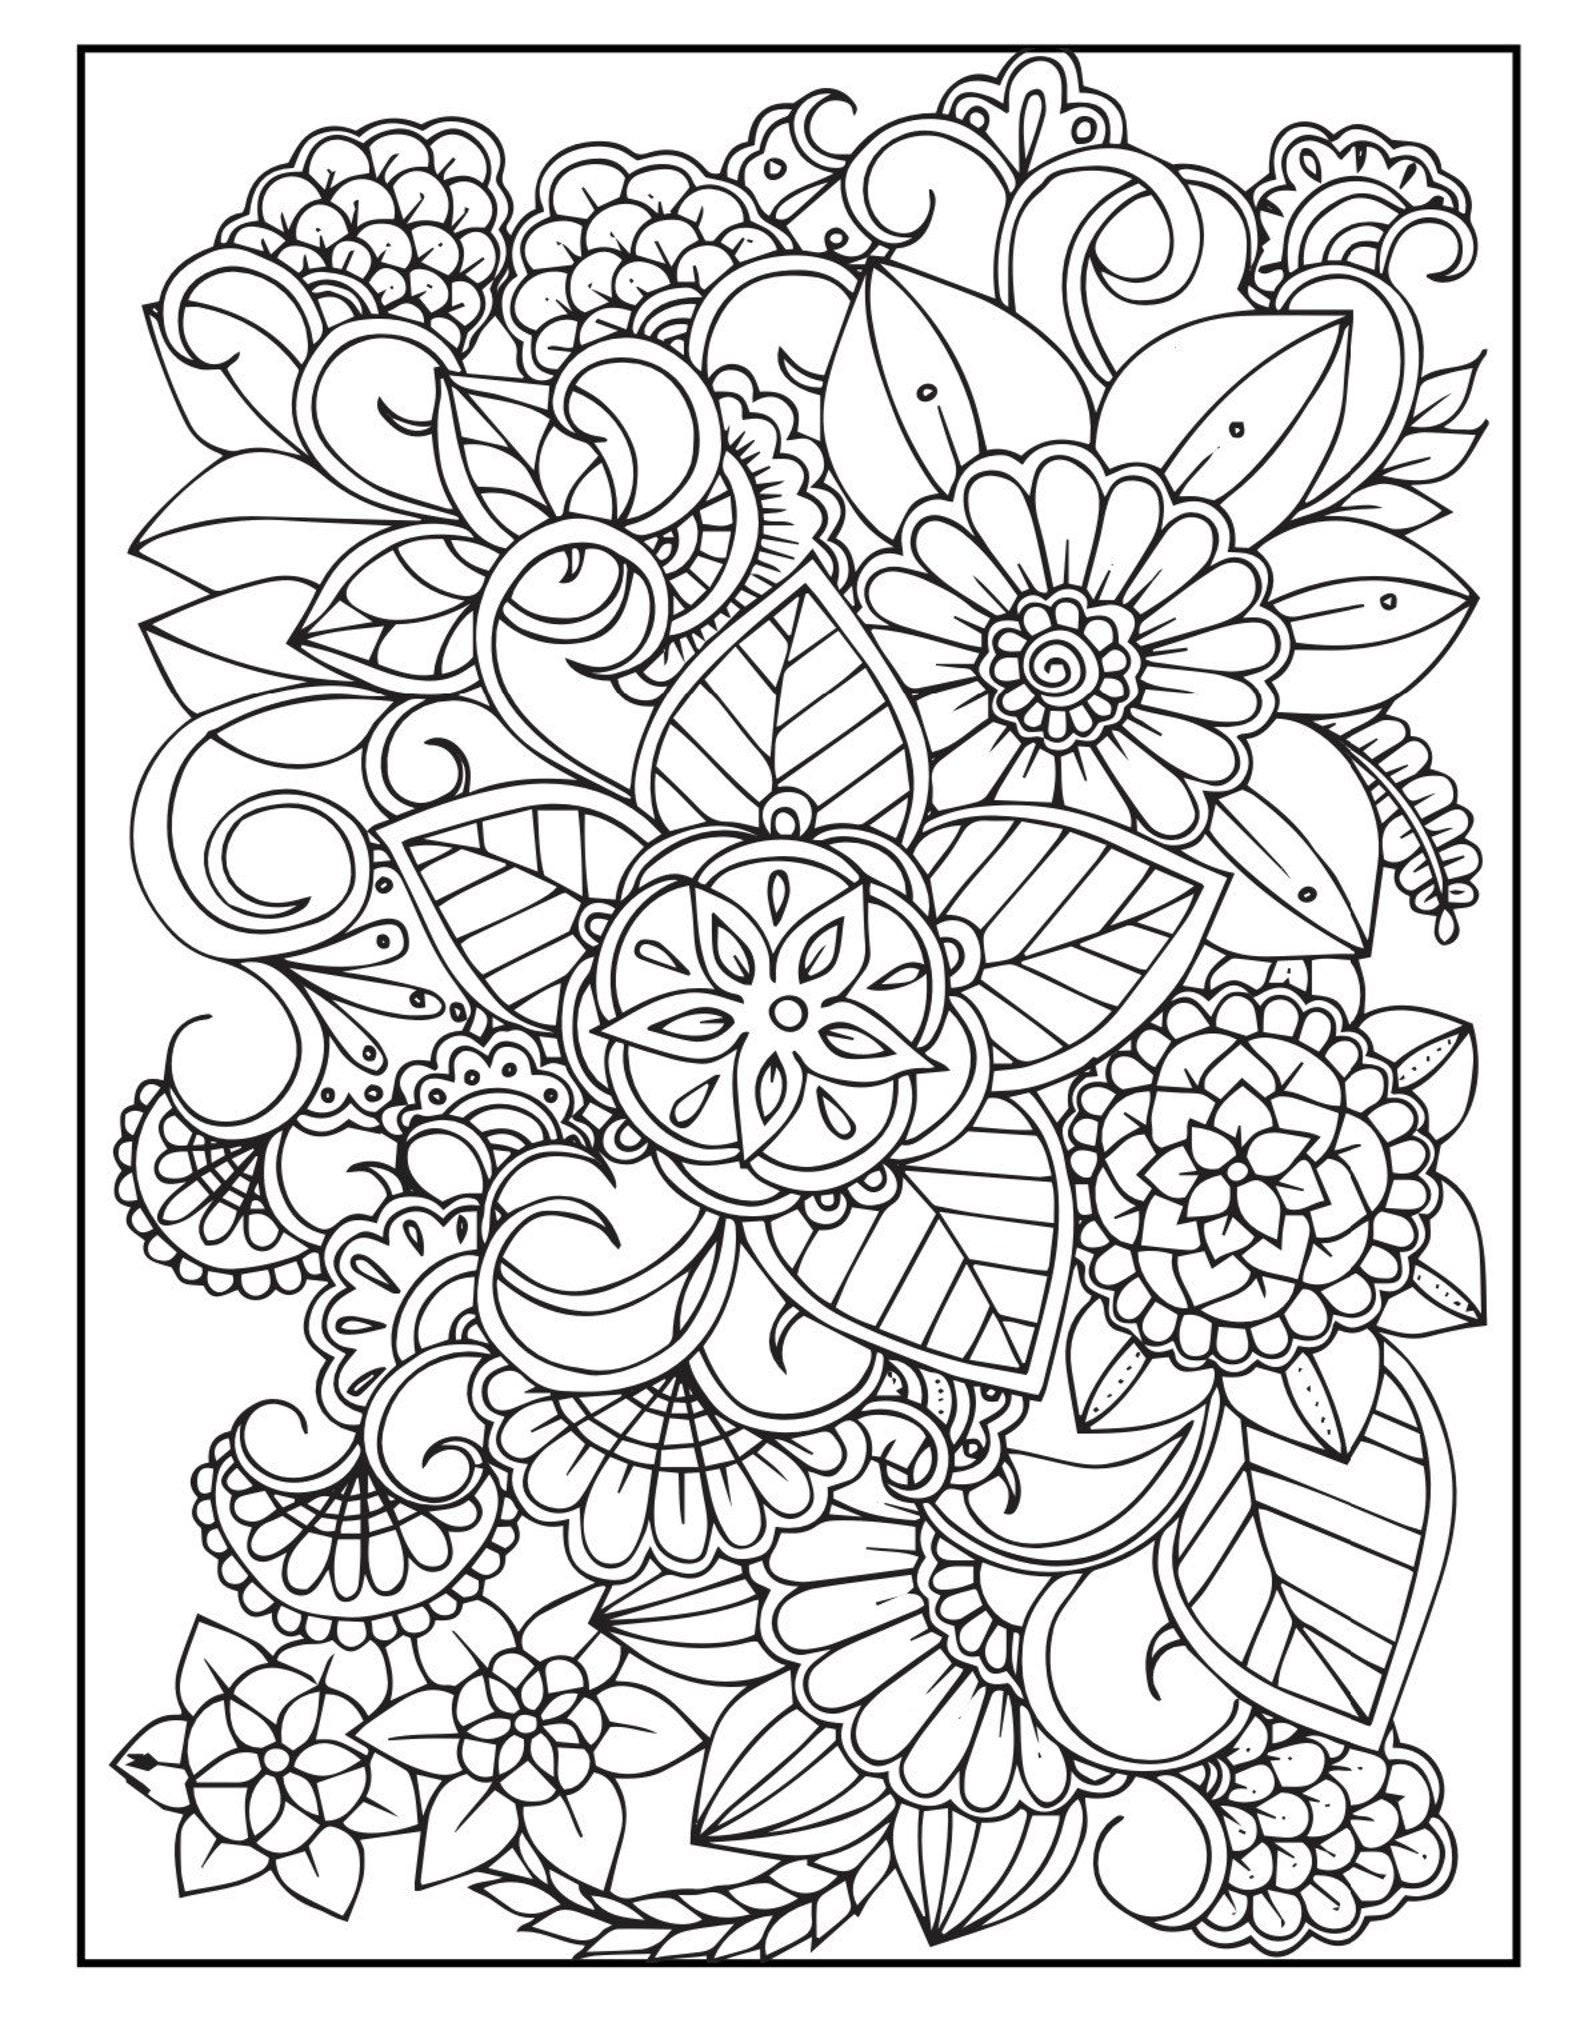 100 PAGES Adult Coloring Pages - Etsy